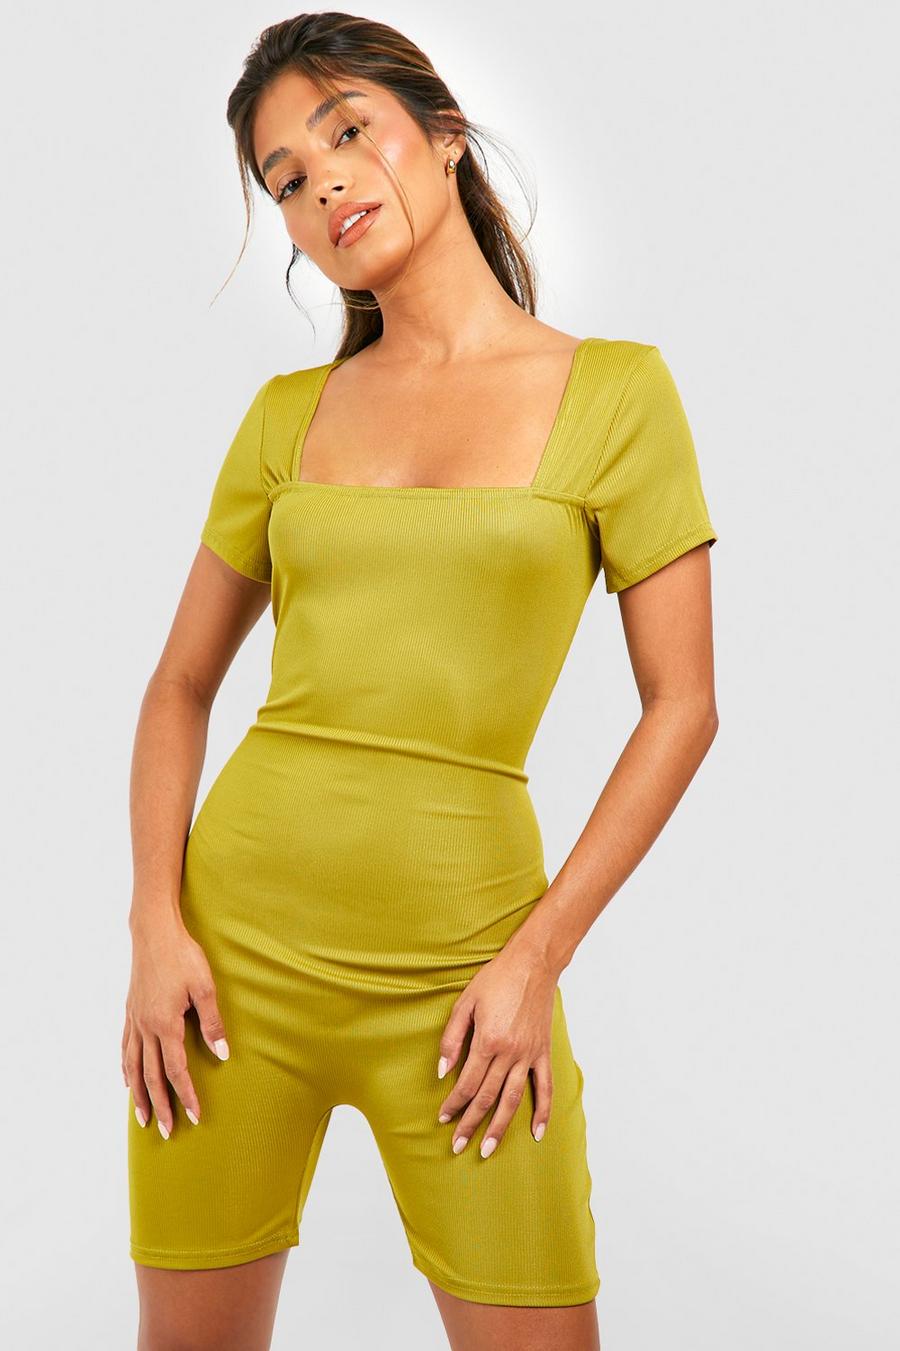 Chartreuse yellow Rib Square Neck Capped Sleeve Unitard  